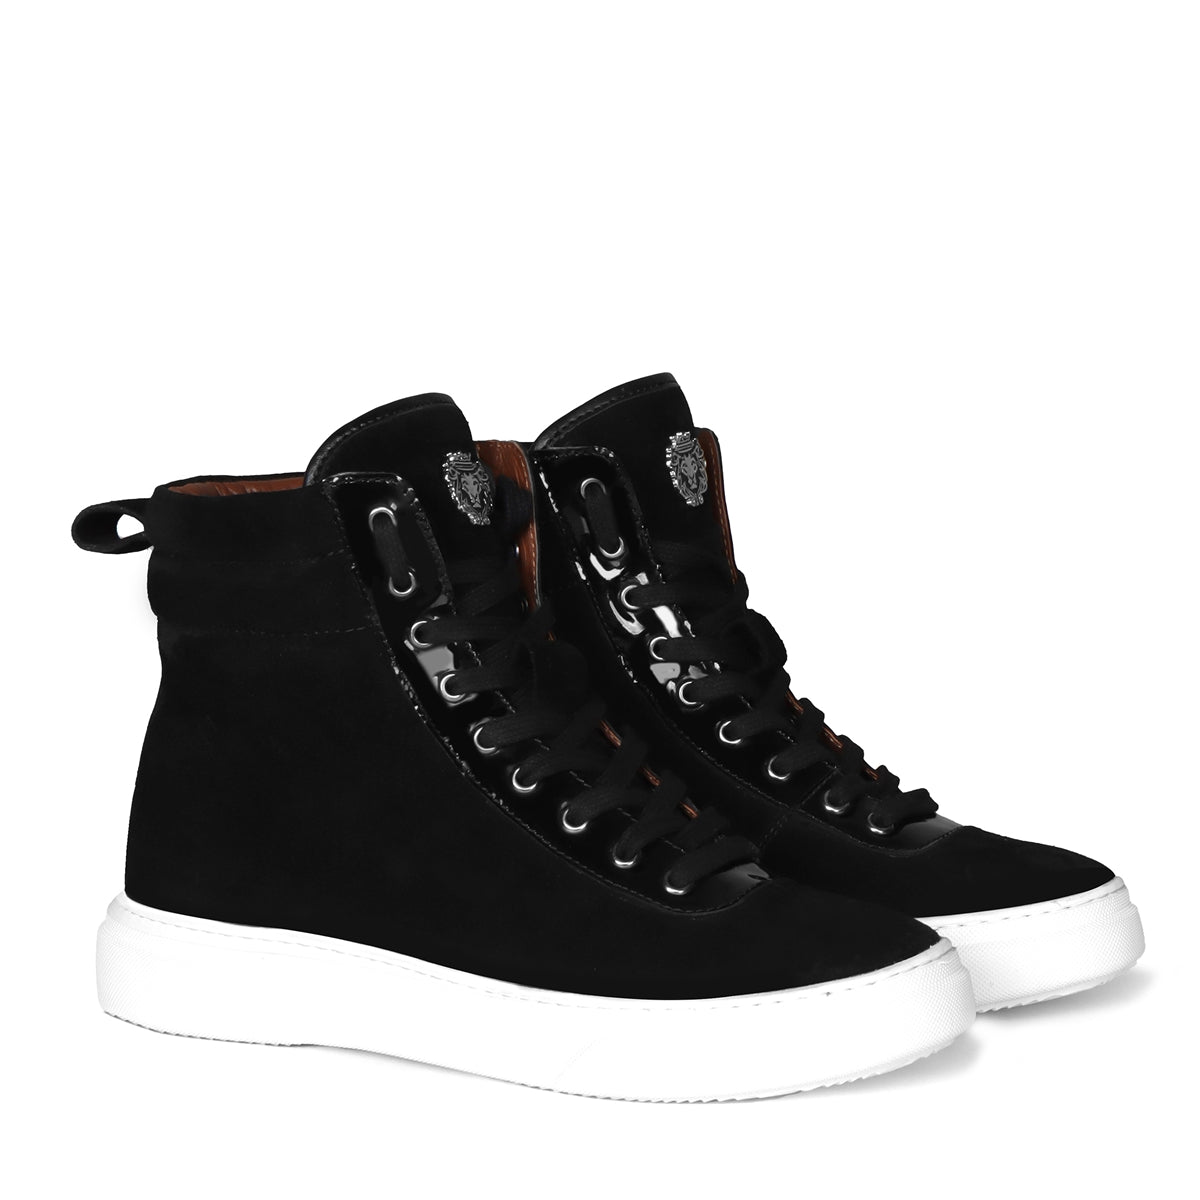 Black Suede Leather With Contrasting Patent Detailing Mid Top Lace-Up Sneakers by Brune & Bareskin